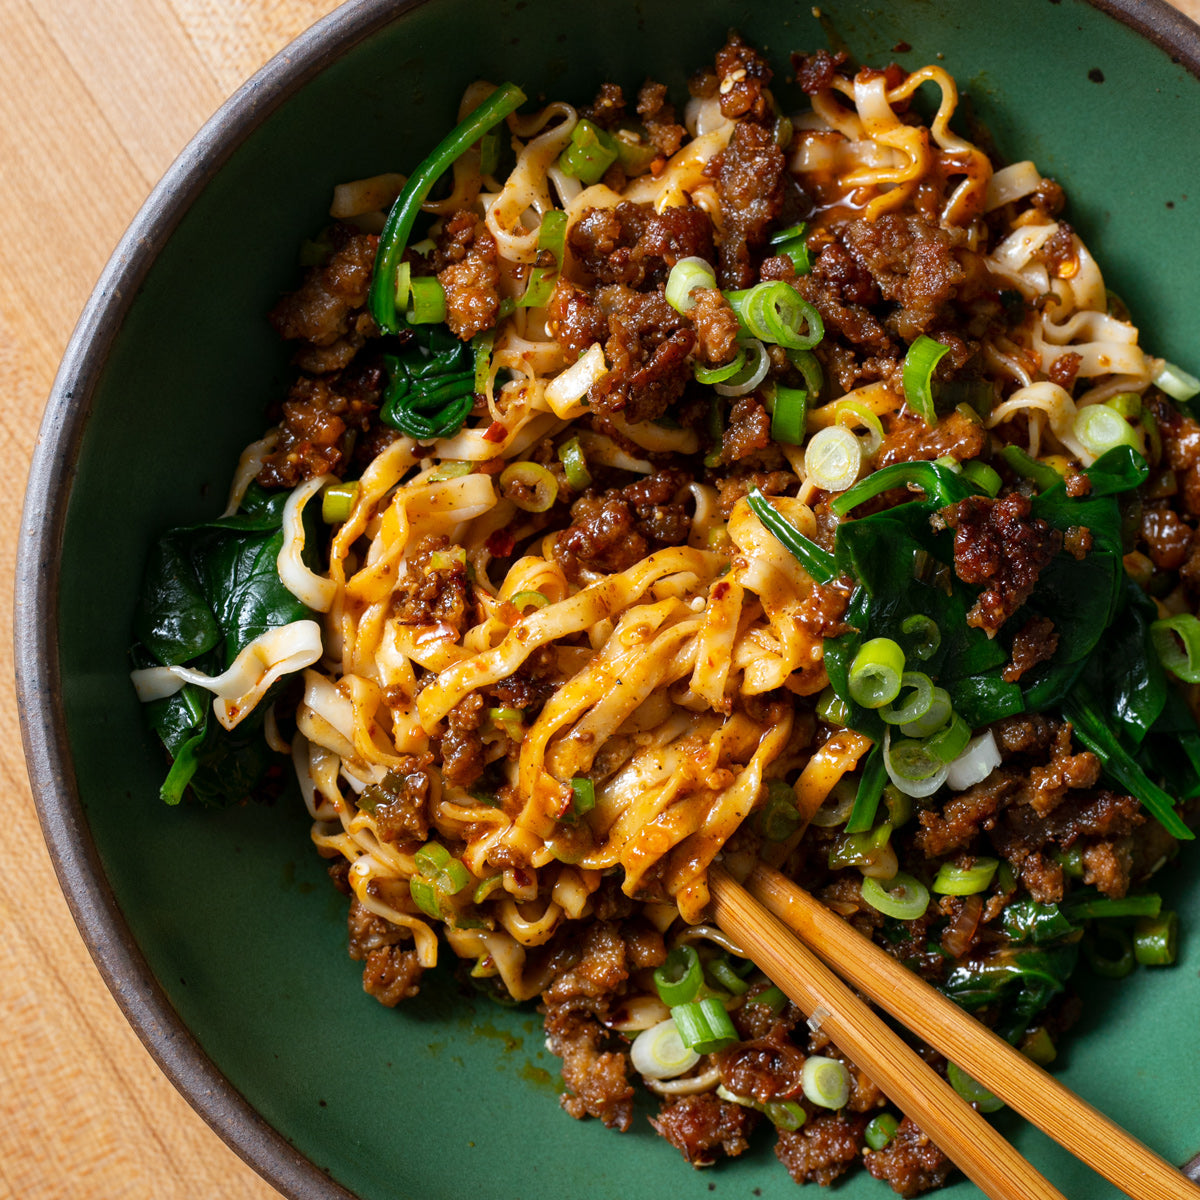 noodles with chili crunch pork and greens